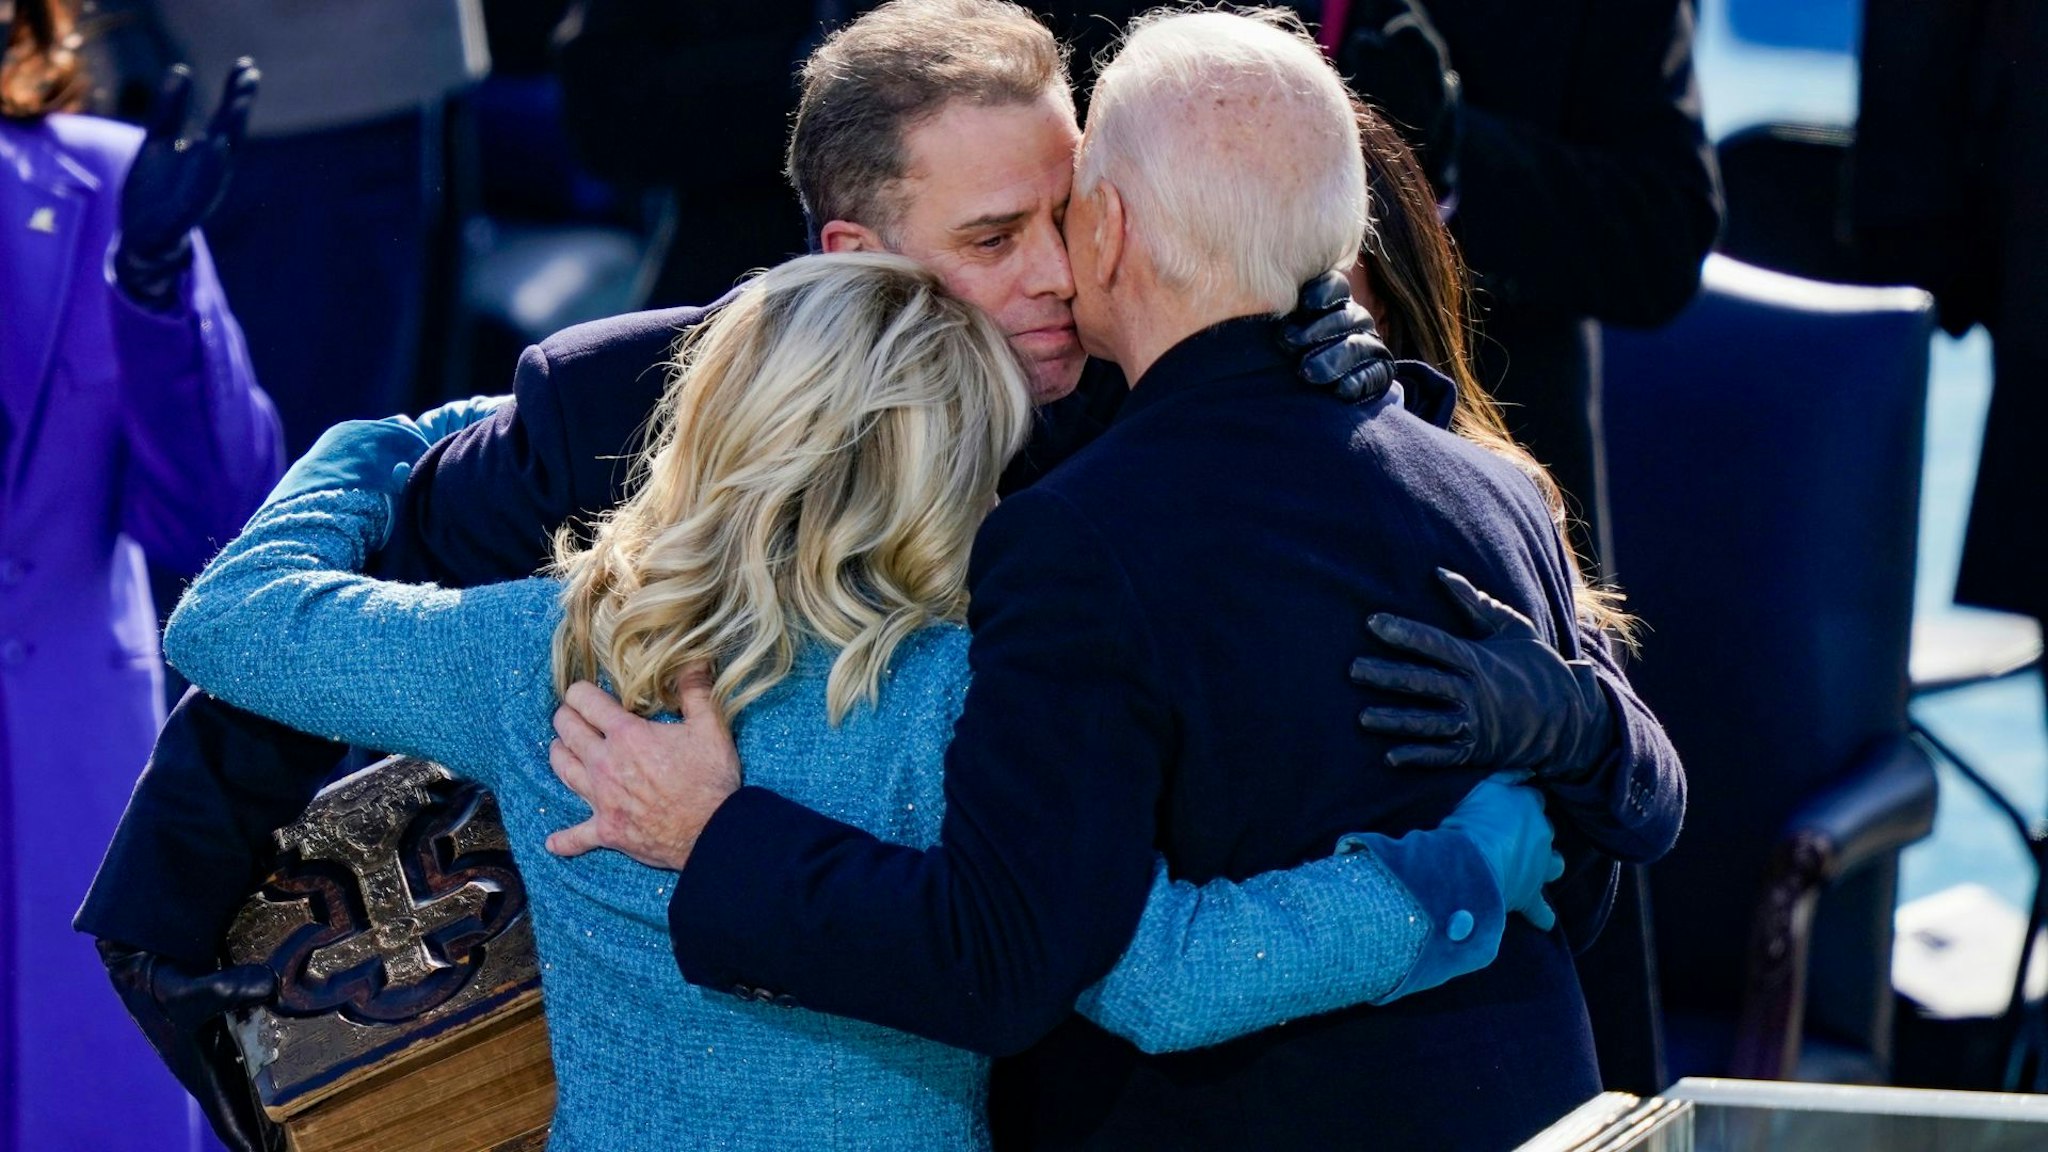 WASHINGTON, DC - JANUARY 20: U.S. President Joe Biden embraces his family First Lady Dr. Jill Biden, son Hunter Biden and daughter Ashley after being sworn in during his inauguation on the West Front of the U.S. Capitol on January 20, 2021 in Washington, DC. During today's inauguration ceremony Joe Biden becomes the 46th president of the United States.